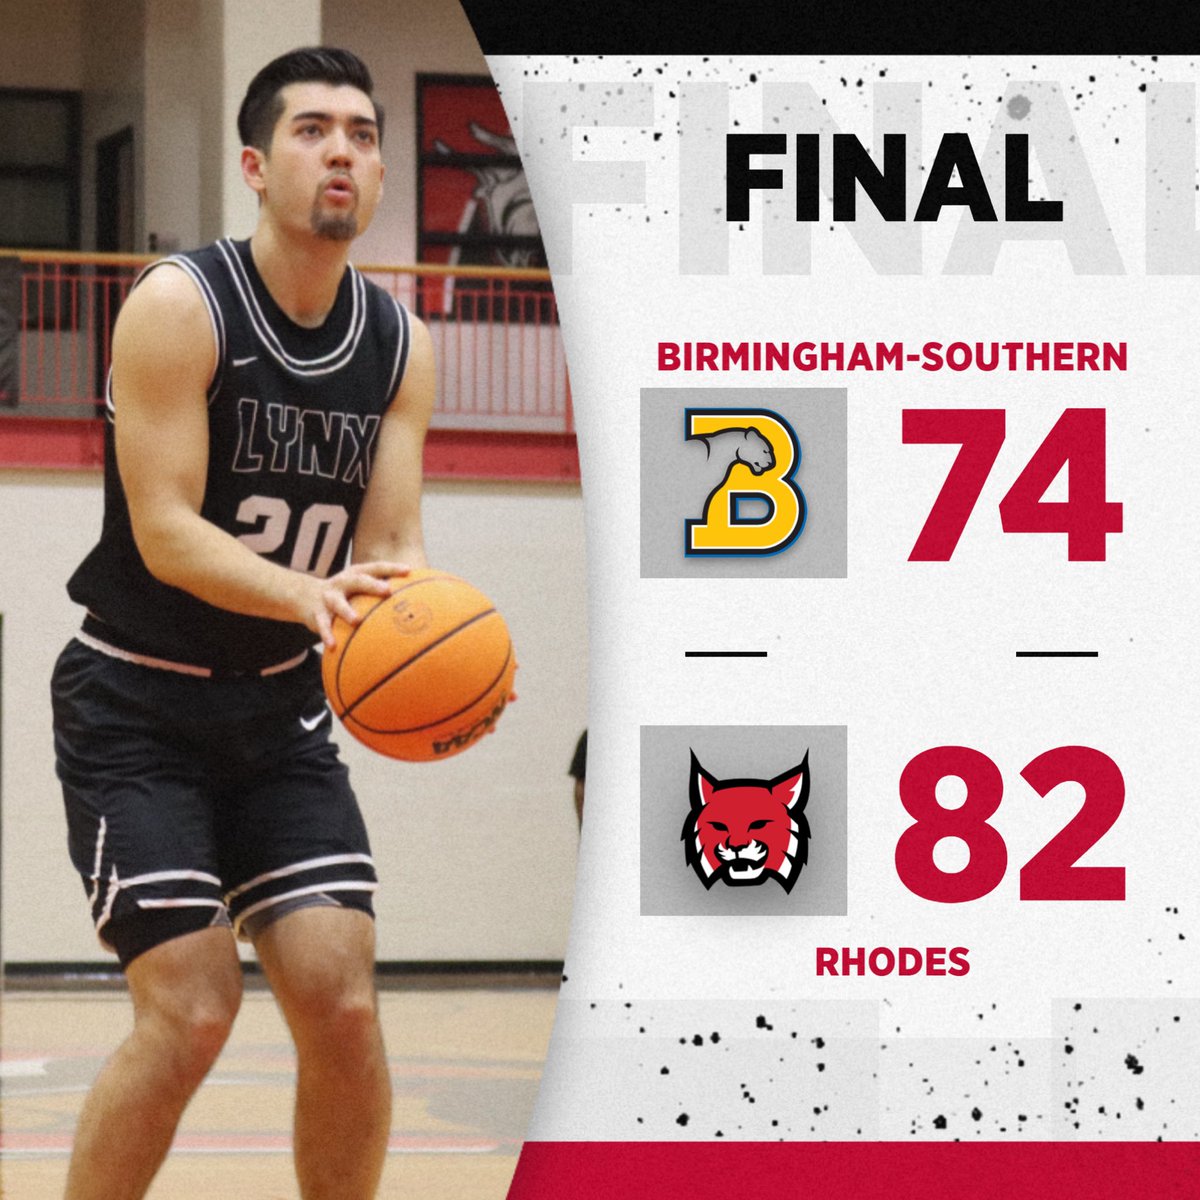 .@rhodeslynxmbb complete 2-0 night for the Lynx on #Fight4Literacy night! 

They’ll be back in action Sunday at 3pm. #RollLynx #D3hoops